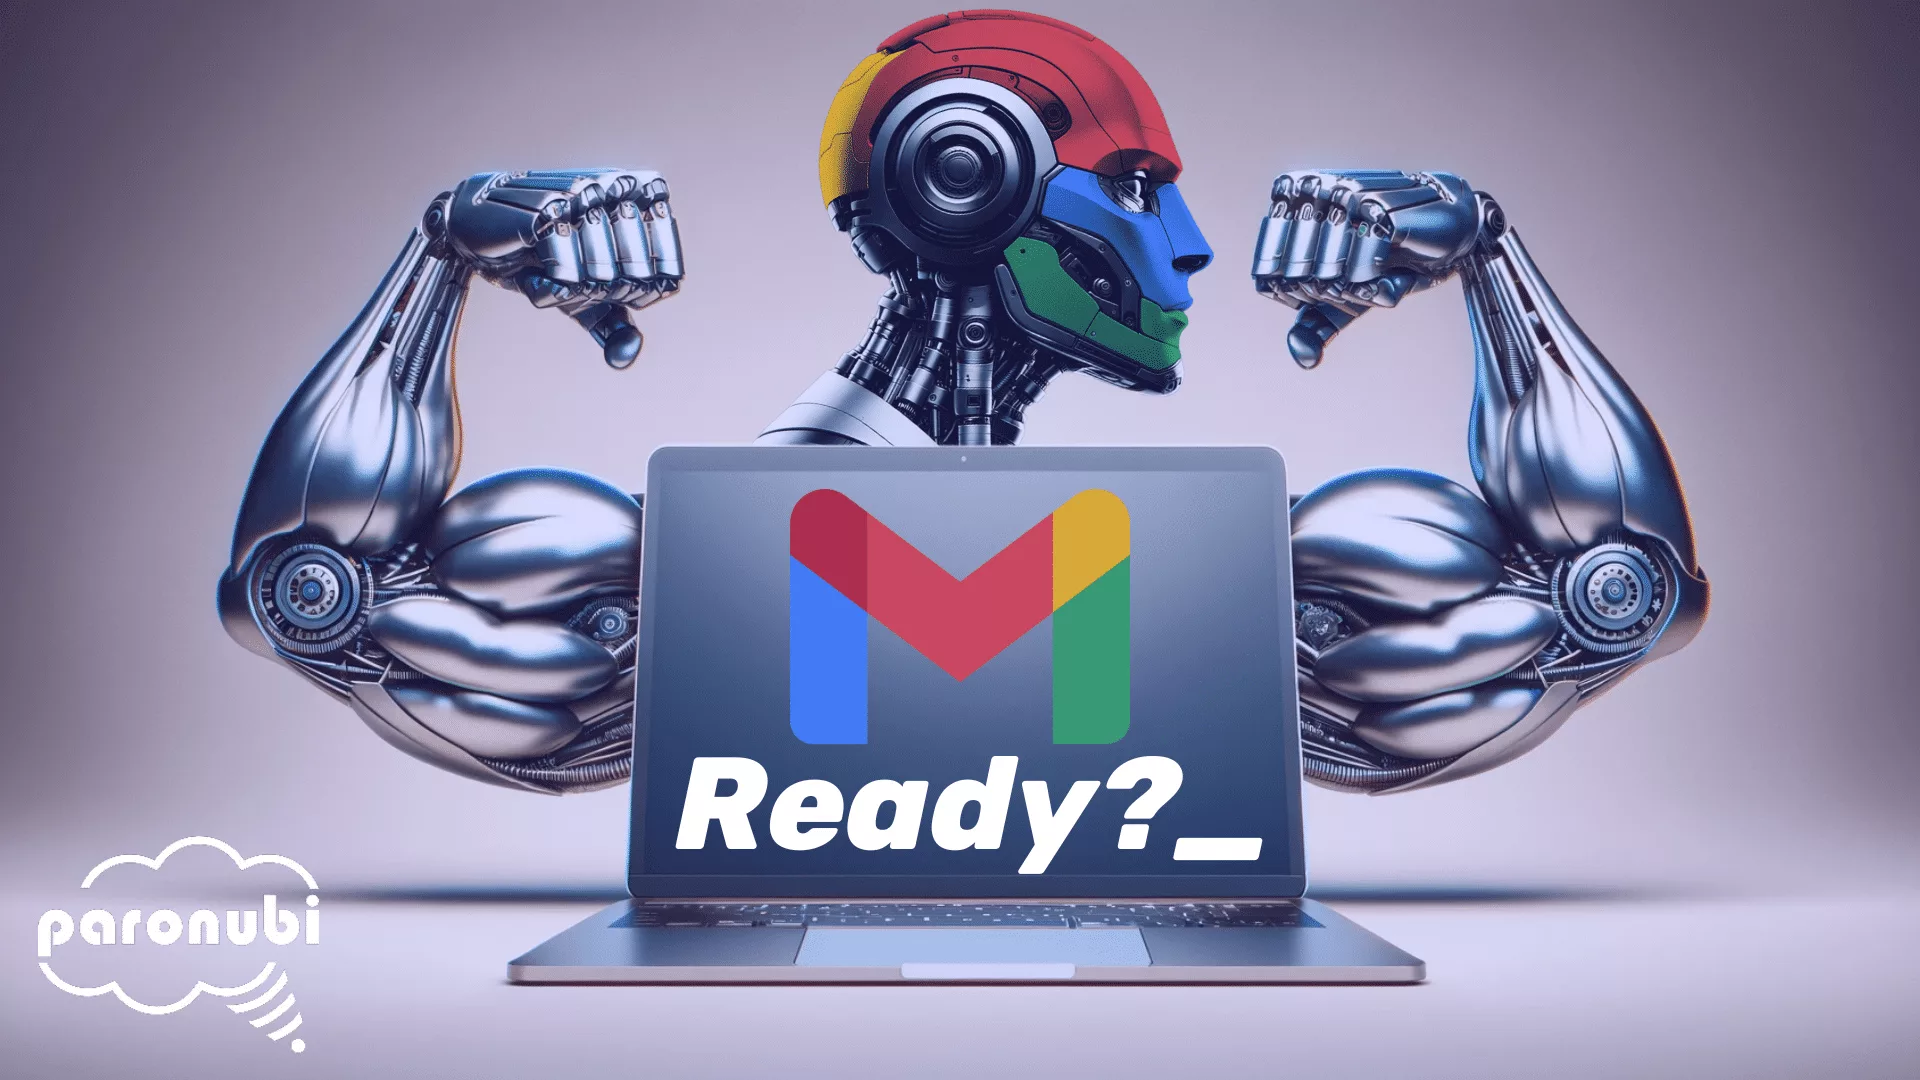 A Retvec robot holding a laptop with the words ready?.